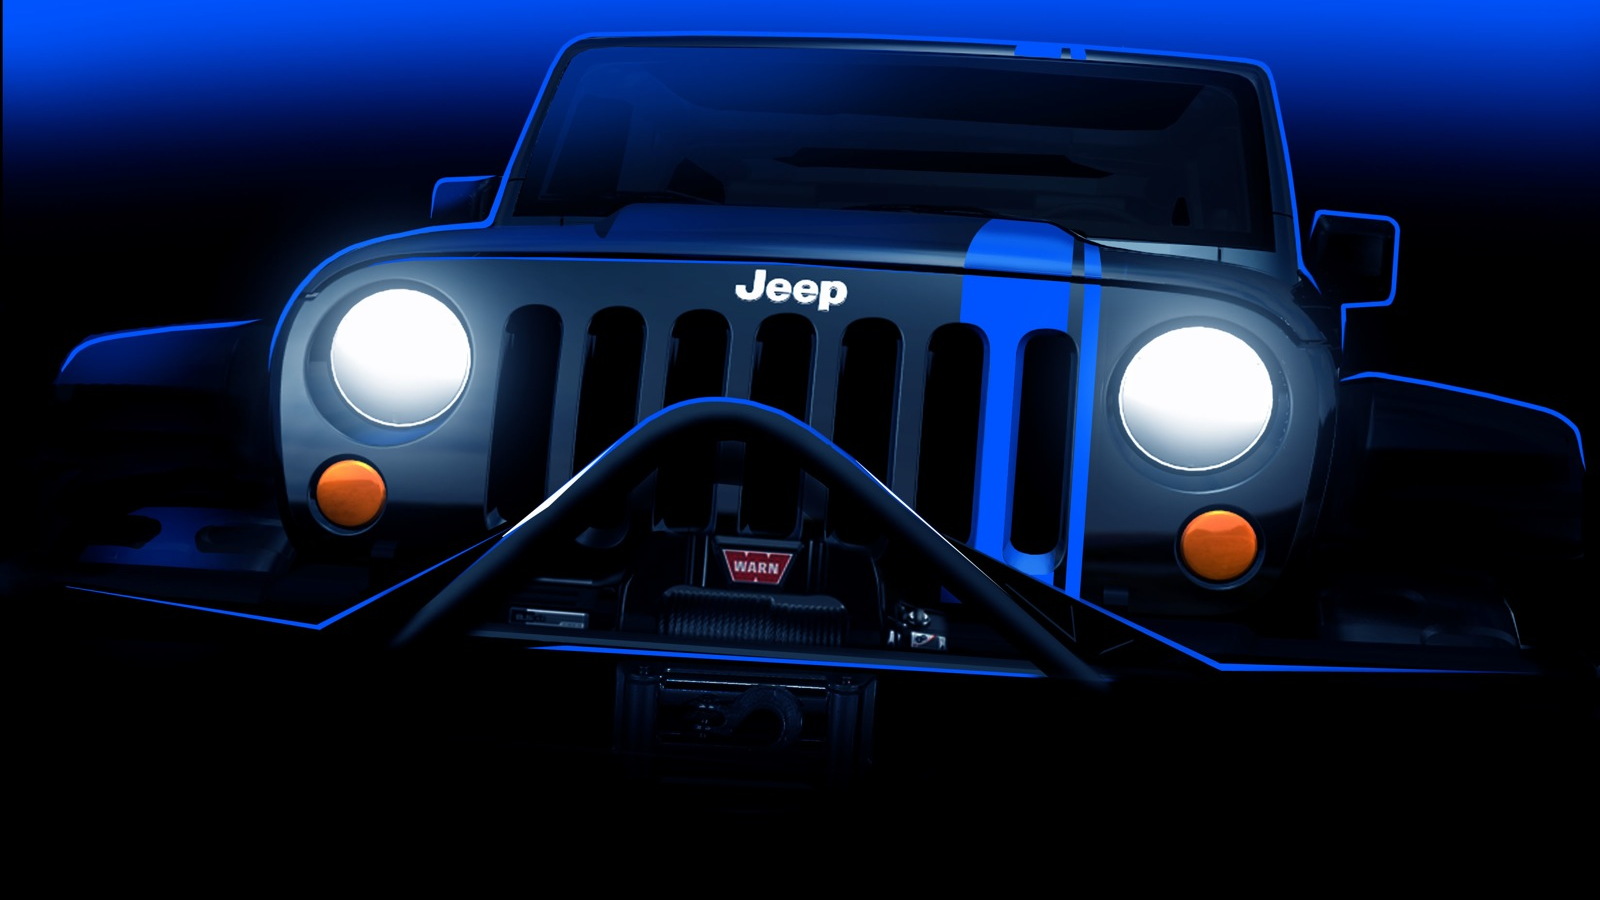 Jeep's concepts for the 2012 Moab Easter Jeep Safari